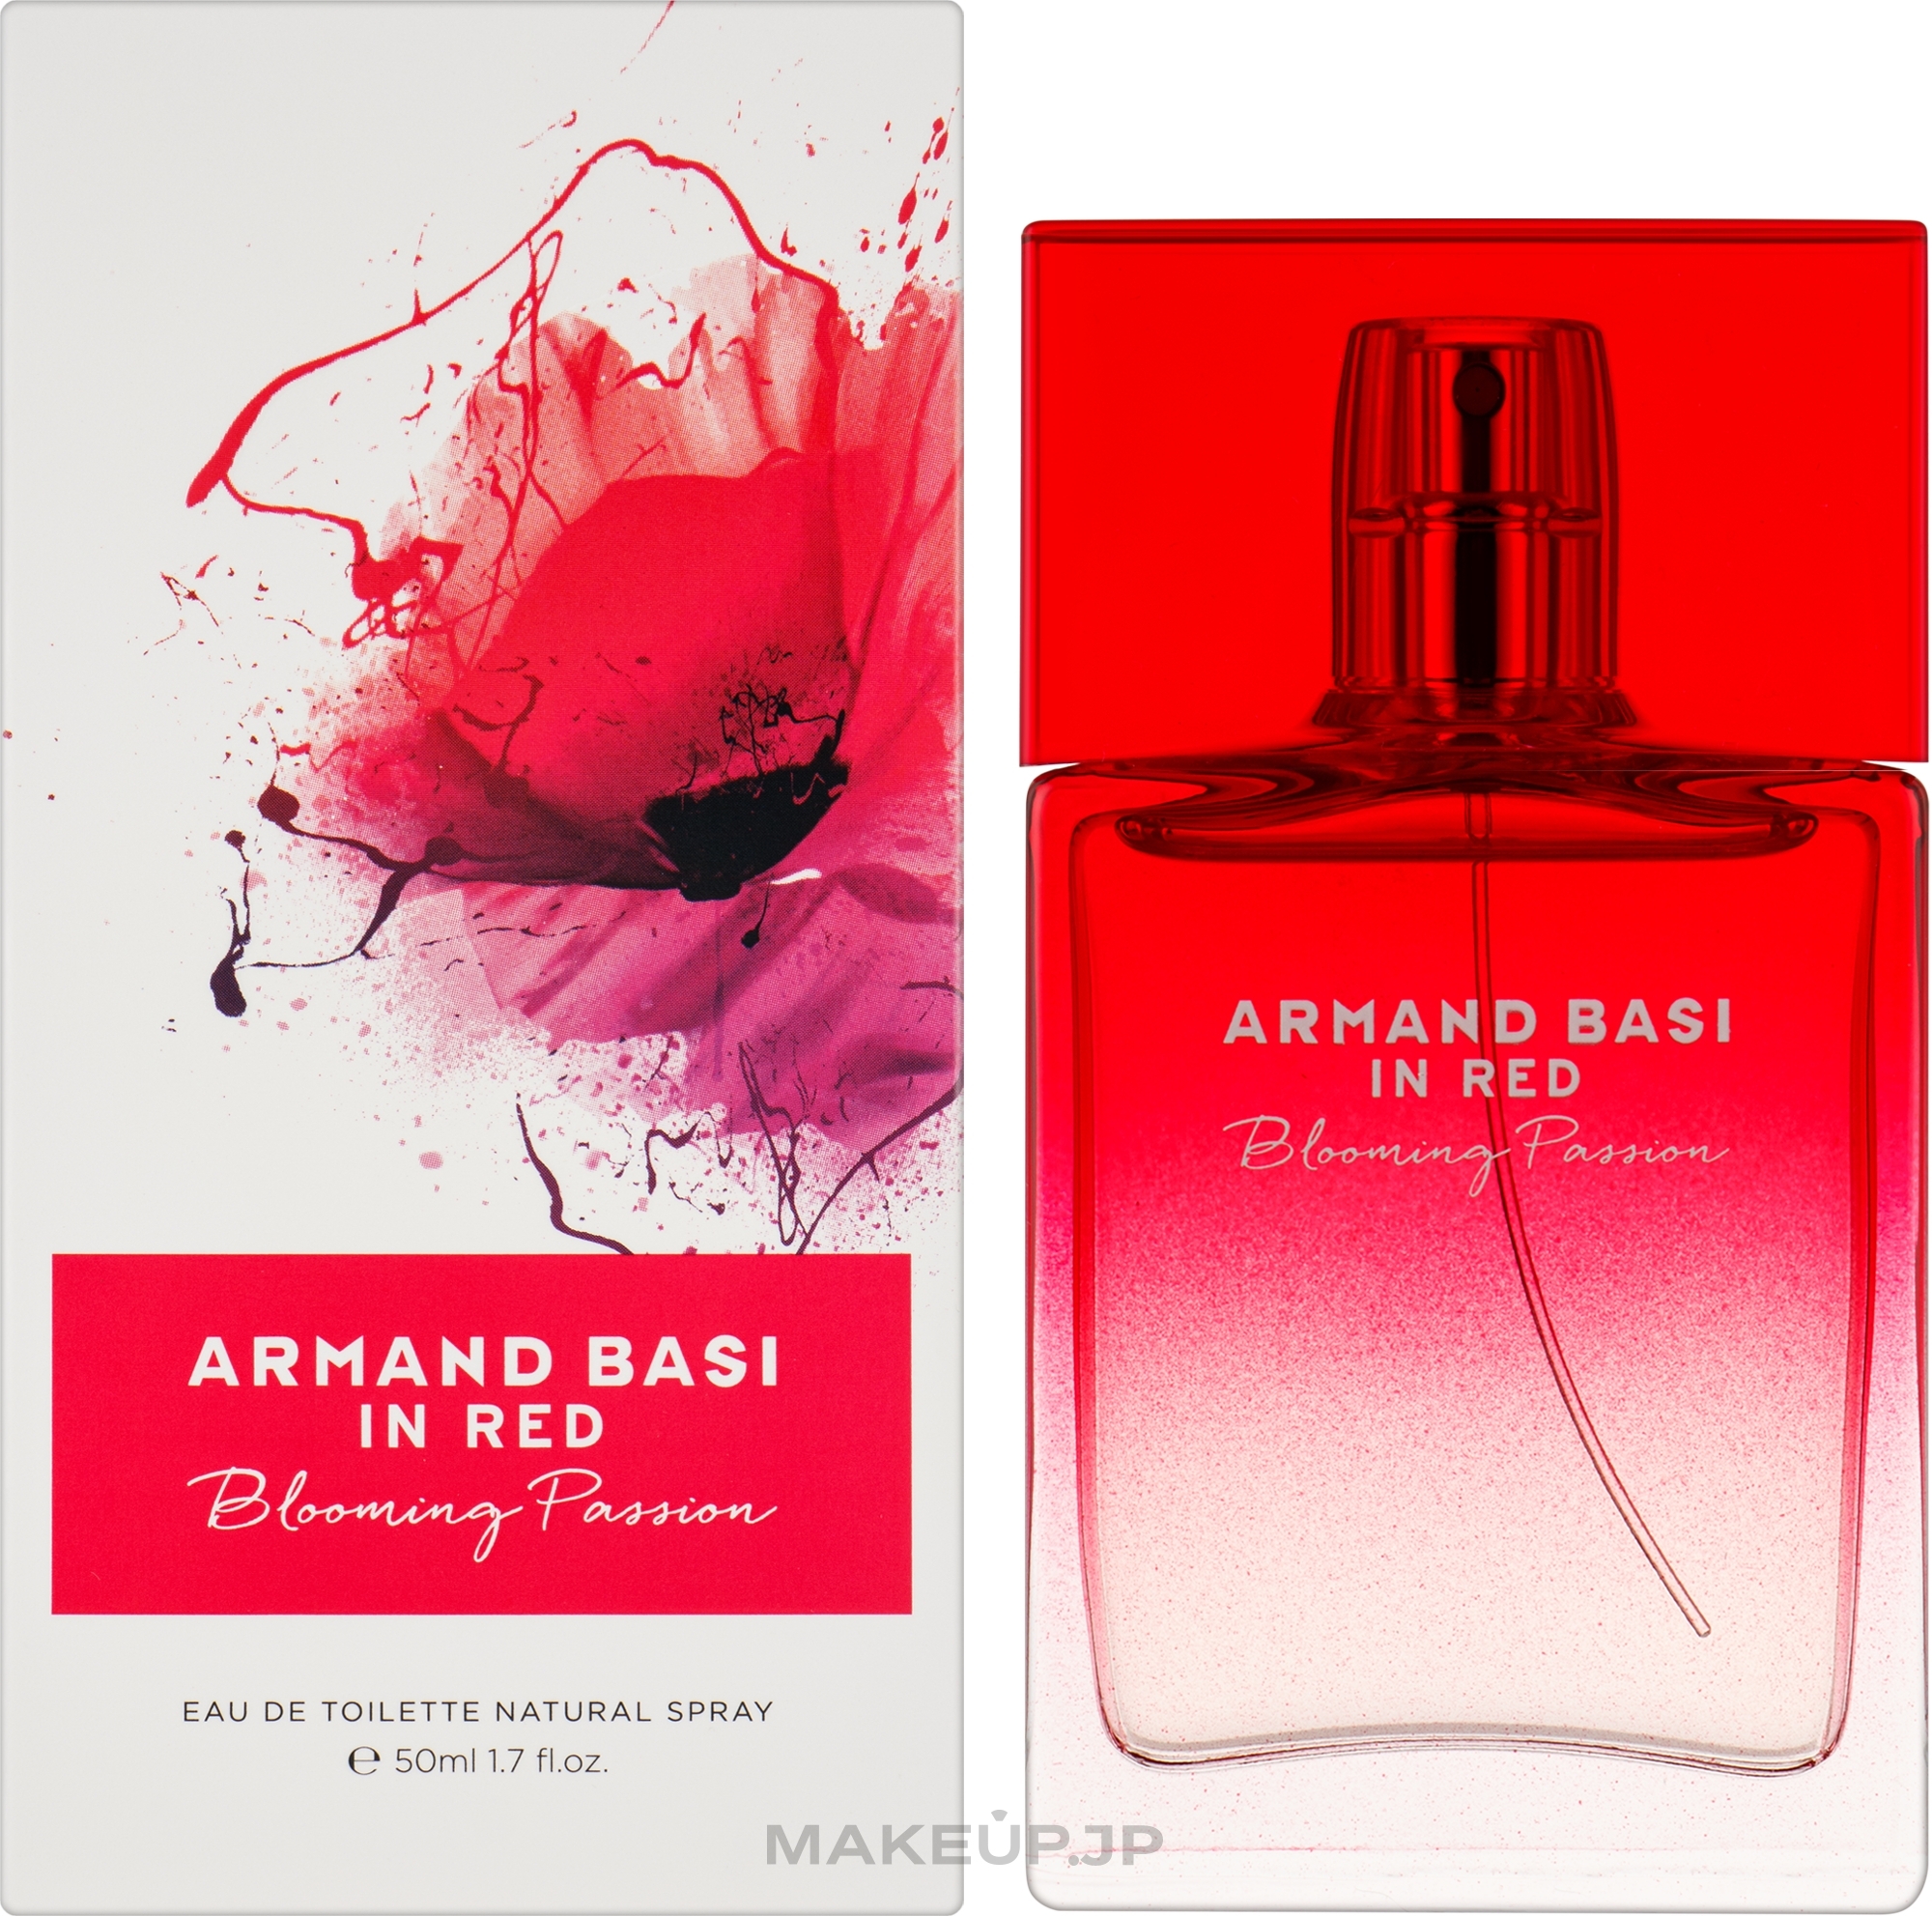 Armand Basi In Red Blooming Passion - Eau de Toilette — photo 50 ml